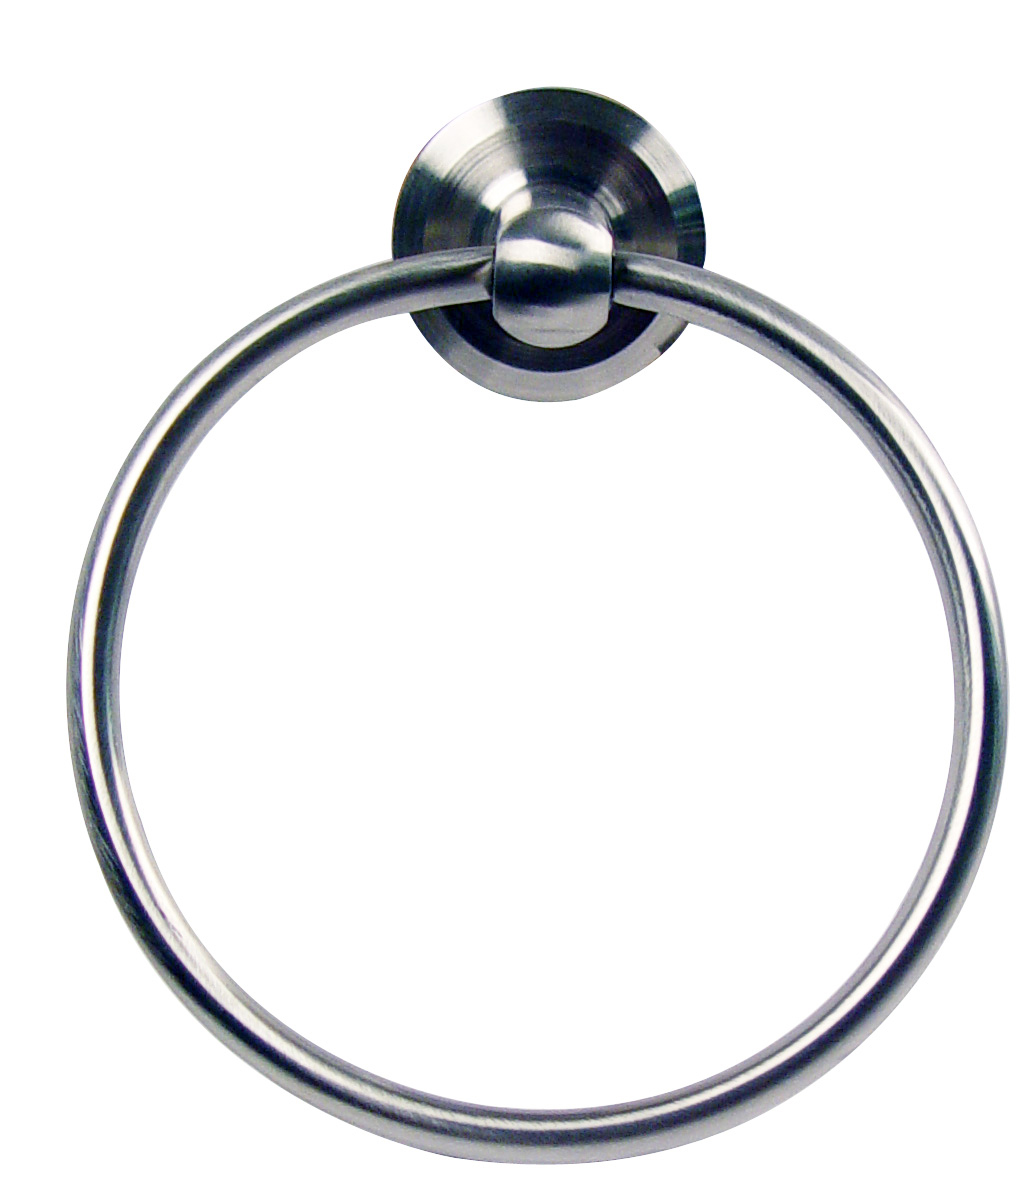 Towel Ring Bath Accessories - Stainless Steel Collection by Emtek